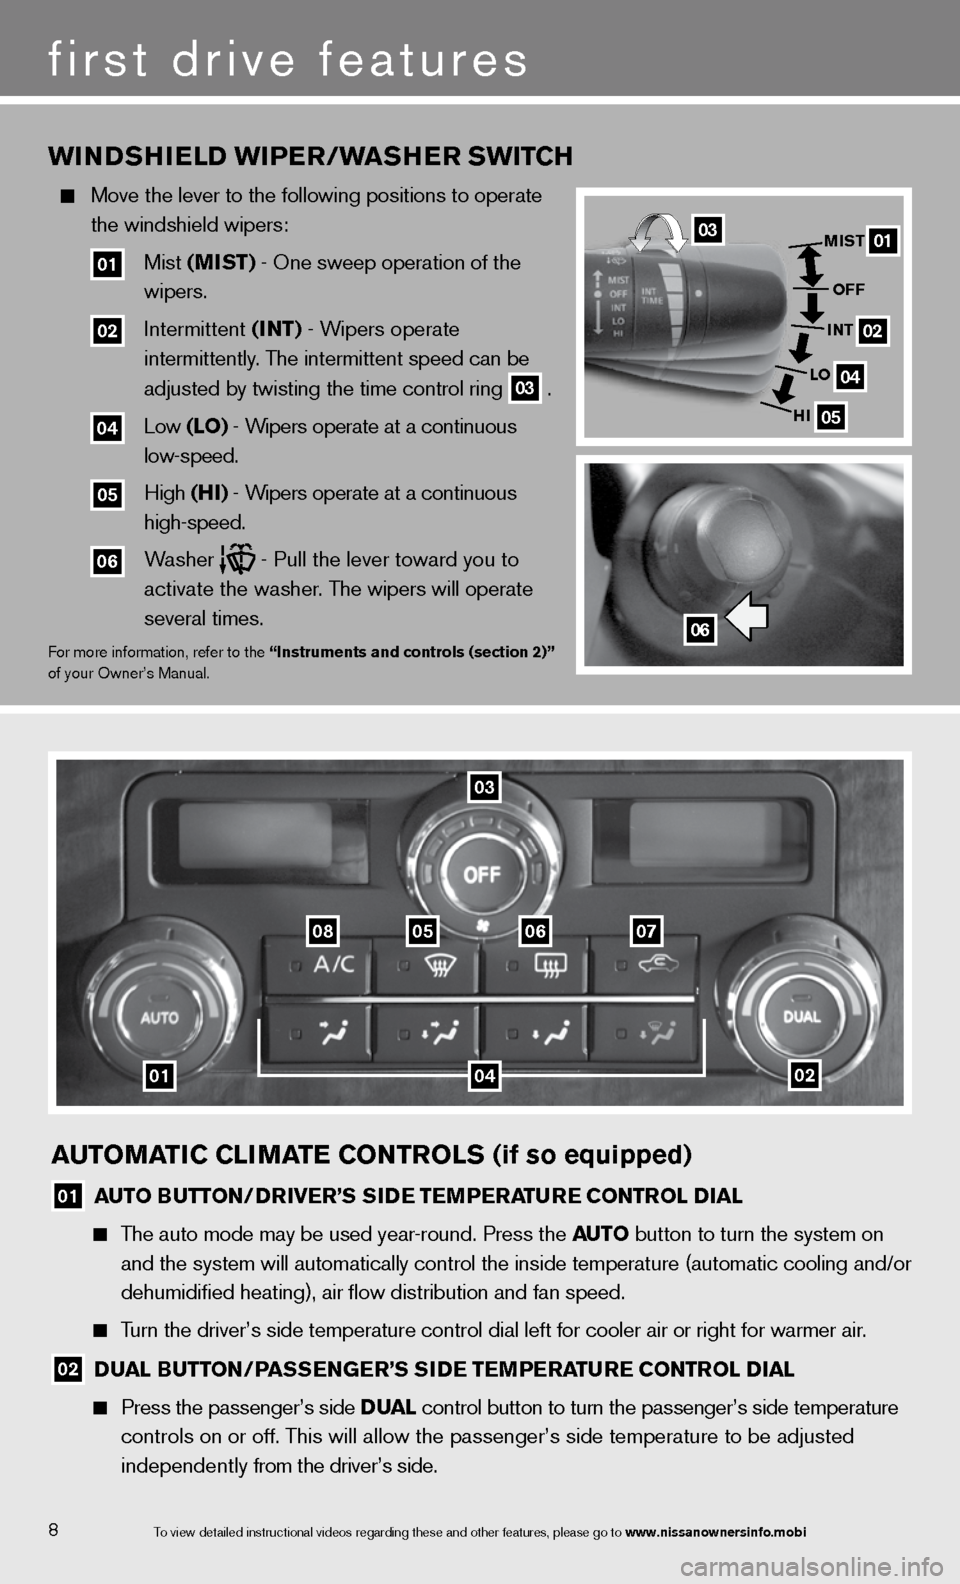 NISSAN TITAN 2013 1.G Quick Reference Guide AUTOMATIC CLIMATE CONTROLS (if so equipped)
01 AUTO BUTTON/DRIvER’S SIDE TEMPERATURE CONTROL DIAL
  
  The auto mode may be used year-round. Press the AUTO  button to turn the system on  
      and 